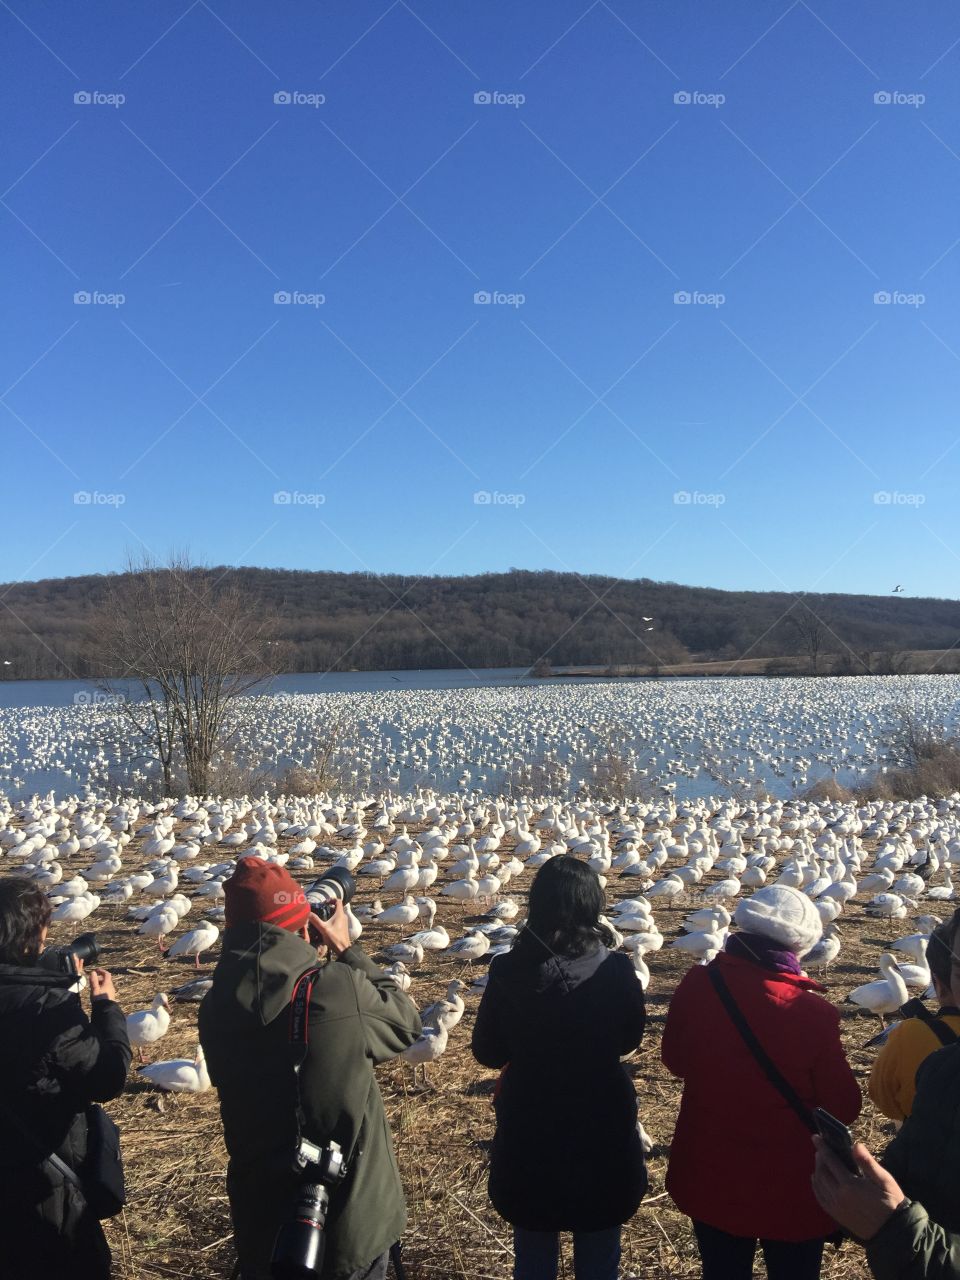 So Many Snow Geese everywhere it looked like it was snowing